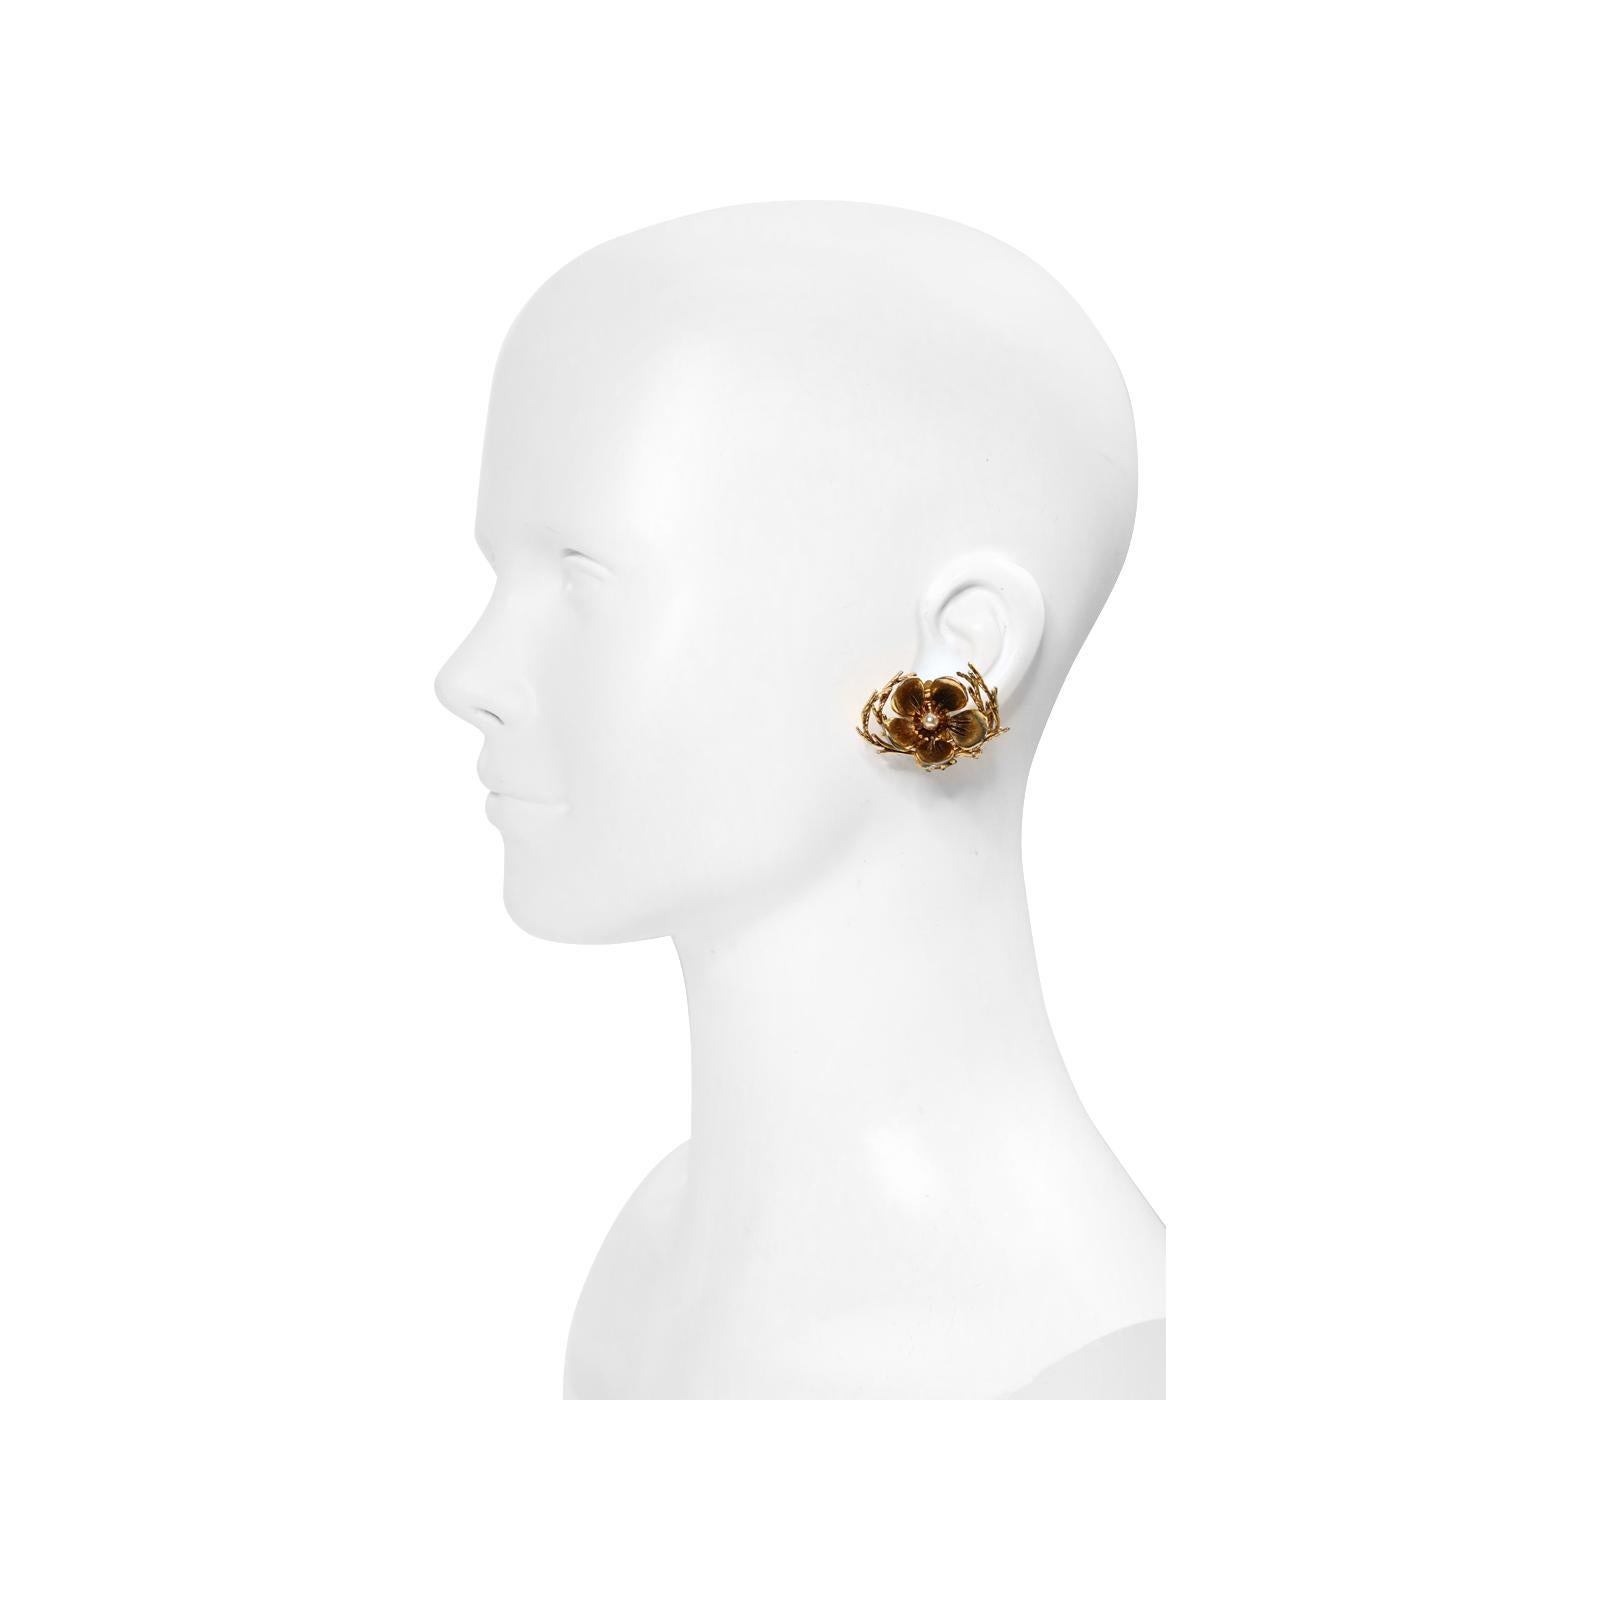 Women's or Men's Vintage Christian Dior Boutique Gold Flower with Faux Pearl, circa 1964 For Sale